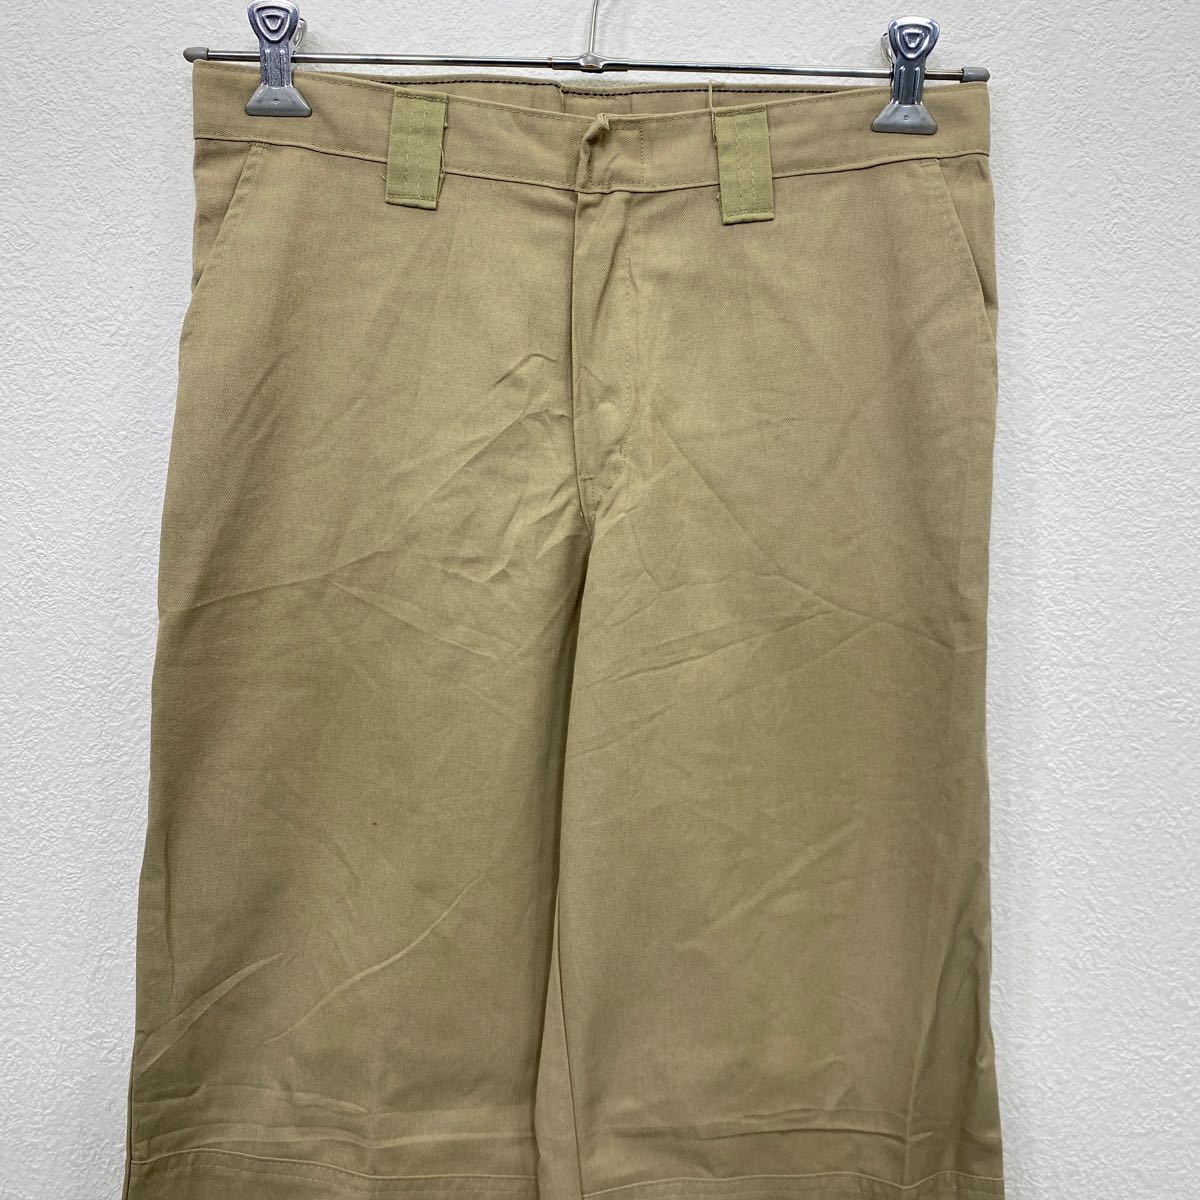 Dickies work pants W31 Dickies double knee lady's beige old clothes . America buying up 2312-1169